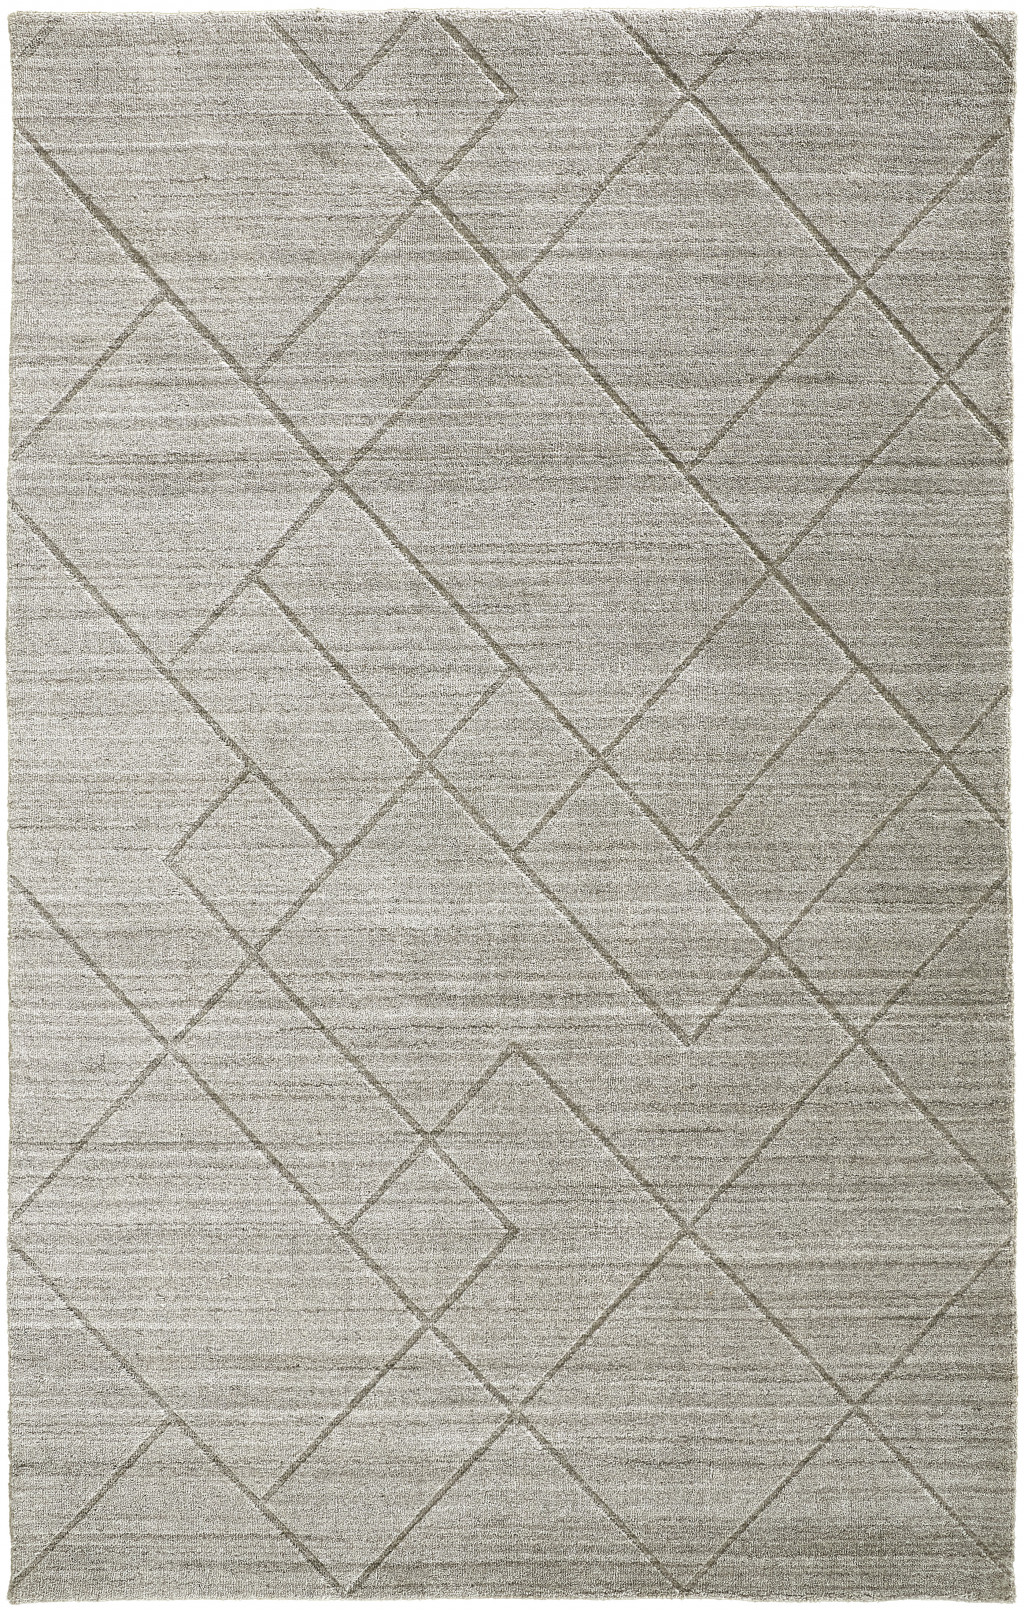 8' X 10' Ivory And Silver Striped Hand Woven Area Rug-514786-1